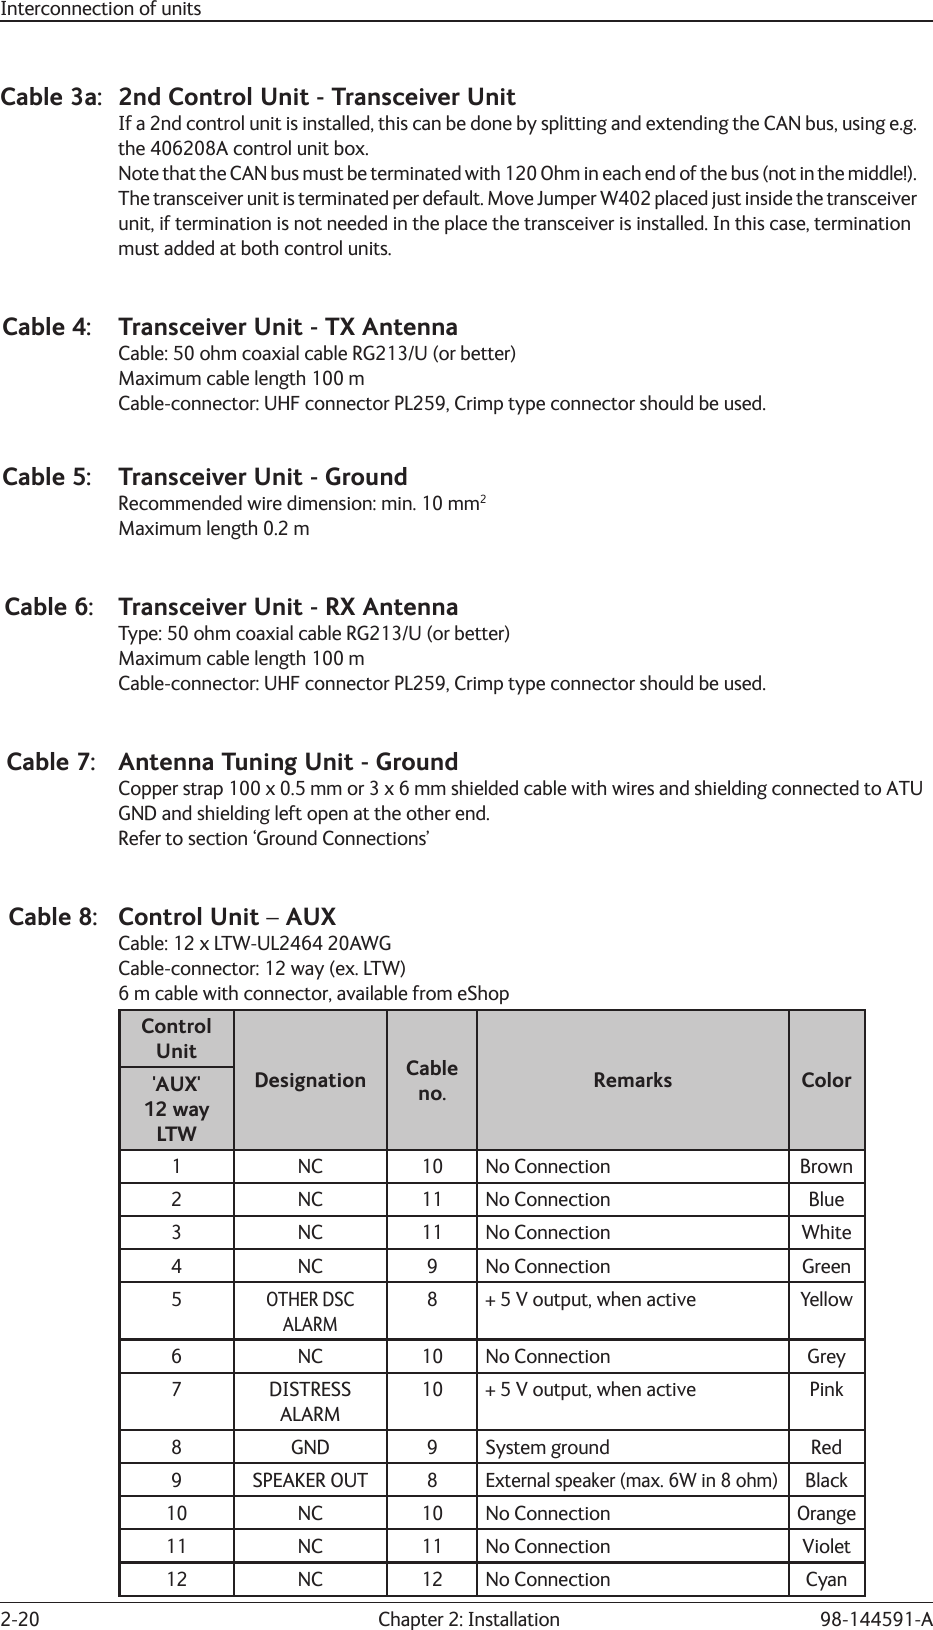 2-20  Chapter 2: Installation 98-144591-AInterconnection of unitsCable 3a:  2nd Control Unit - Transceiver Unit  If a 2nd control unit is installed, this can be done by splitting and extending the CAN bus, using e.g.  the 406208A control unit box.  Note that the CAN bus must be terminated with 120 Ohm in each end of the bus (not in the middle!).  The transceiver unit is terminated per default. Move Jumper W402 placed just inside the transceiver   unit, if termination is not needed in the place the transceiver is installed. In this case, termination   must added at both control units.Cable 4:  Transceiver Unit - TX Antenna  Cable: 50 ohm coaxial cable RG213/U (or better)  Maximum cable length 100 m  Cable-connector: UHF connector PL259, Crimp type connector should be used.Cable 5:  Transceiver Unit - Ground  Recommended wire dimension: min. 10 mm2  Maximum length 0.2 mCable 6:  Transceiver Unit - RX Antenna  Type: 50 ohm coaxial cable RG213/U (or better)  Maximum cable length 100 m  Cable-connector: UHF connector PL259, Crimp type connector should be used.Cable 7:  Antenna Tuning Unit - Ground  Copper strap 100 x 0.5 mm or 3 x 6 mm shielded cable with wires and shielding connected to ATU  GND and shielding left open at the other end.  Refer to section ‘Ground Connections’Cable 8:  Control Unit – AUX  Cable: 12 x LTW-UL2464 20AWG  Cable-connector: 12 way (ex. LTW)  6 m cable with connector, available from eShopControl UnitDesignation Cable no. Remarks Color&apos;AUX&apos;12 way LTW1 NC 10 No Connection Brown2 NC 11 No Connection Blue3 NC 11 No Connection White4 NC 9 No Connection Green5OTHER DSC ALARM8 + 5 V output, when active Yellow6 NC 10 No Connection Grey7 DISTRESS ALARM10 + 5 V output, when active Pink8 GND 9 System ground Red9 SPEAKER OUT 8External speaker (max. 6W in 8 ohm)Black10 NC 10 No Connection Orange11 NC 11 No Connection Violet12 NC 12 No Connection Cyan